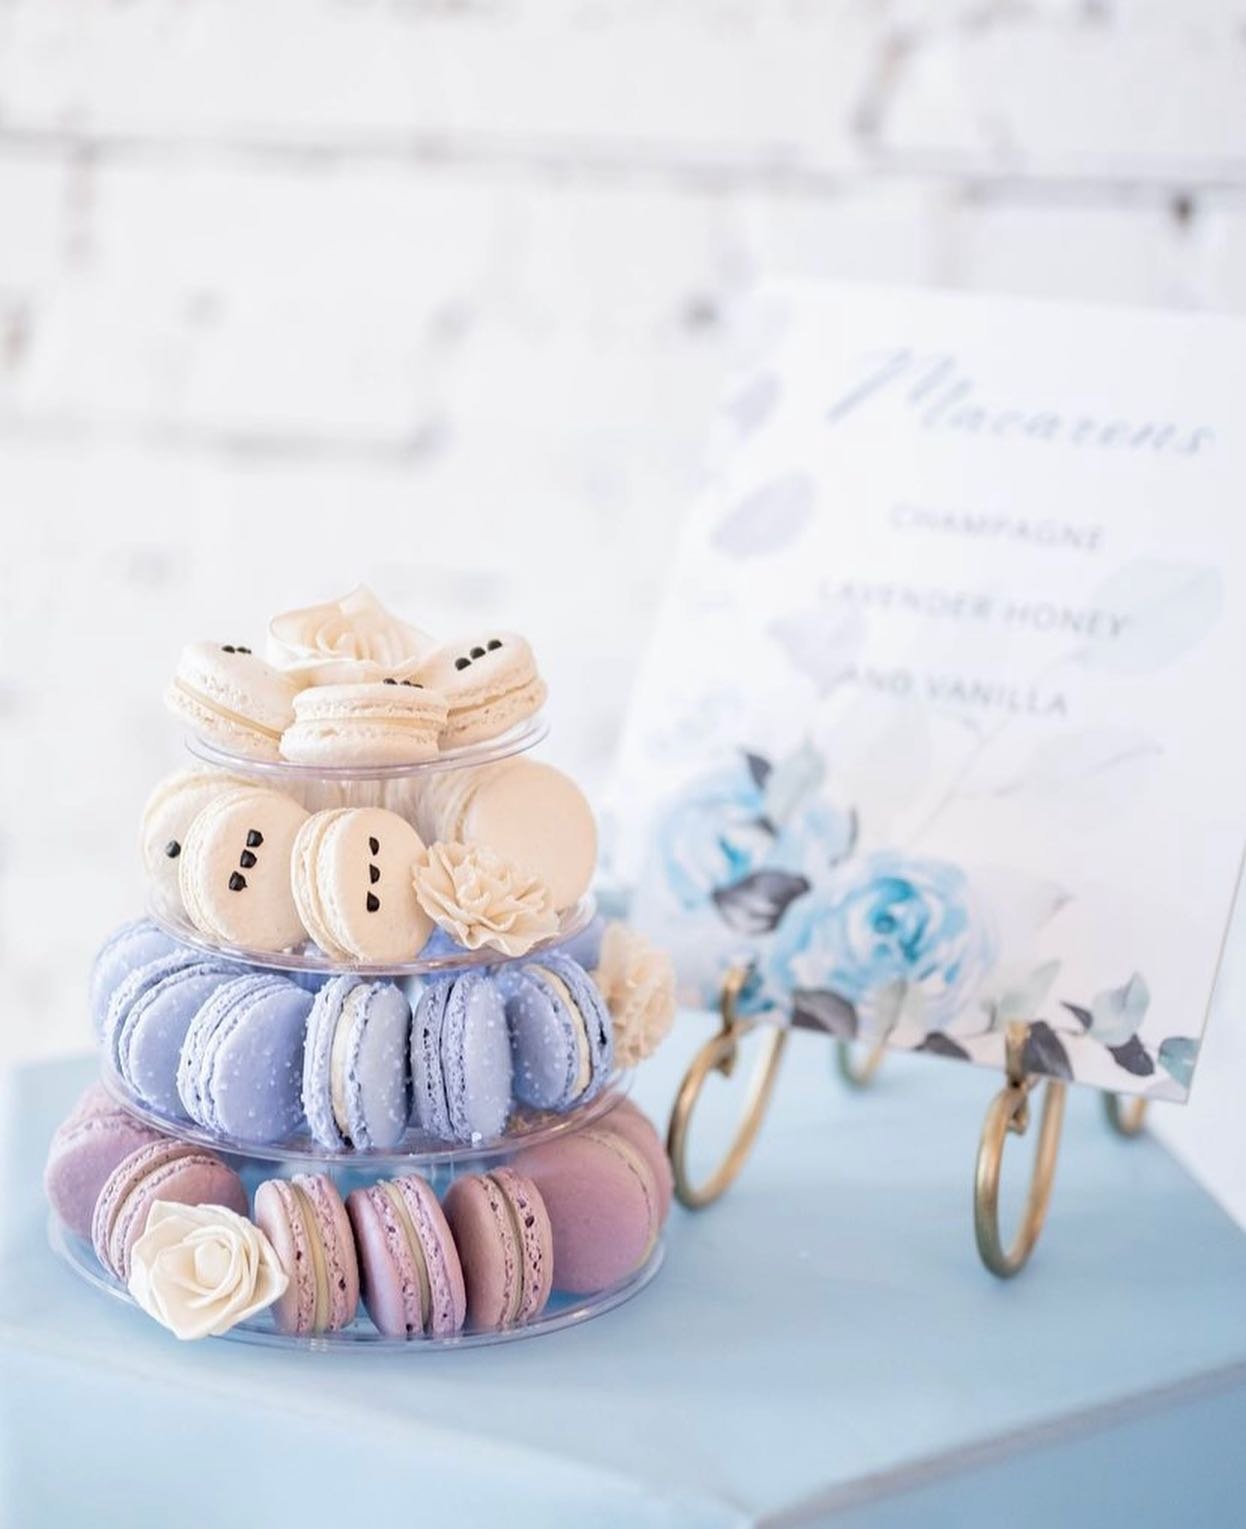 We&rsquo;re entering wedding season reminiscing about this beautiful styled shoot for @bronte.bride! 🤍 Planning your wedding celebrations? Add a touch of sweetness with our macaron favours, towers and order customizations to complement your vision!
